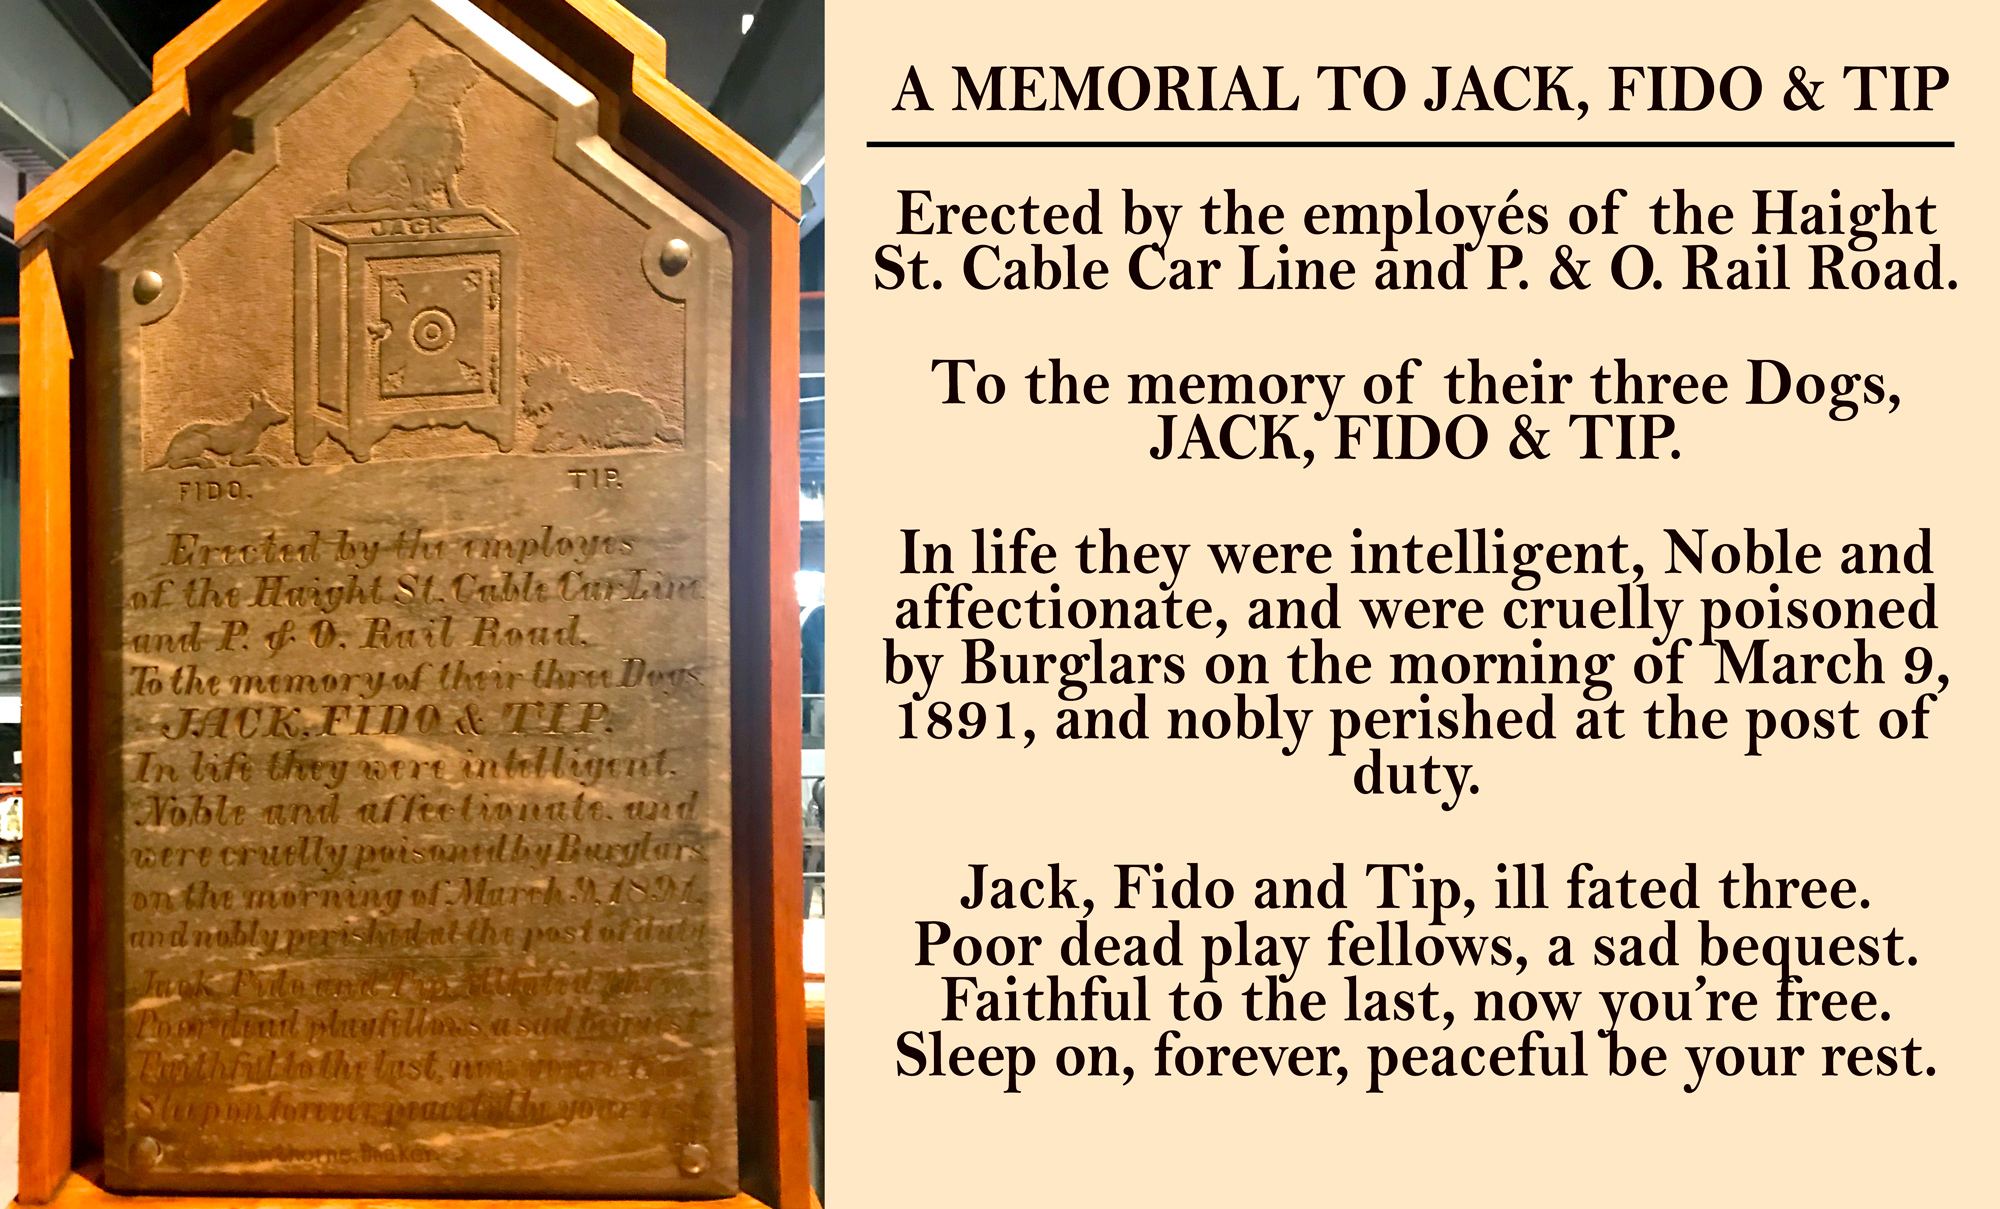 Historic marker for Jack, Fido, and Tip